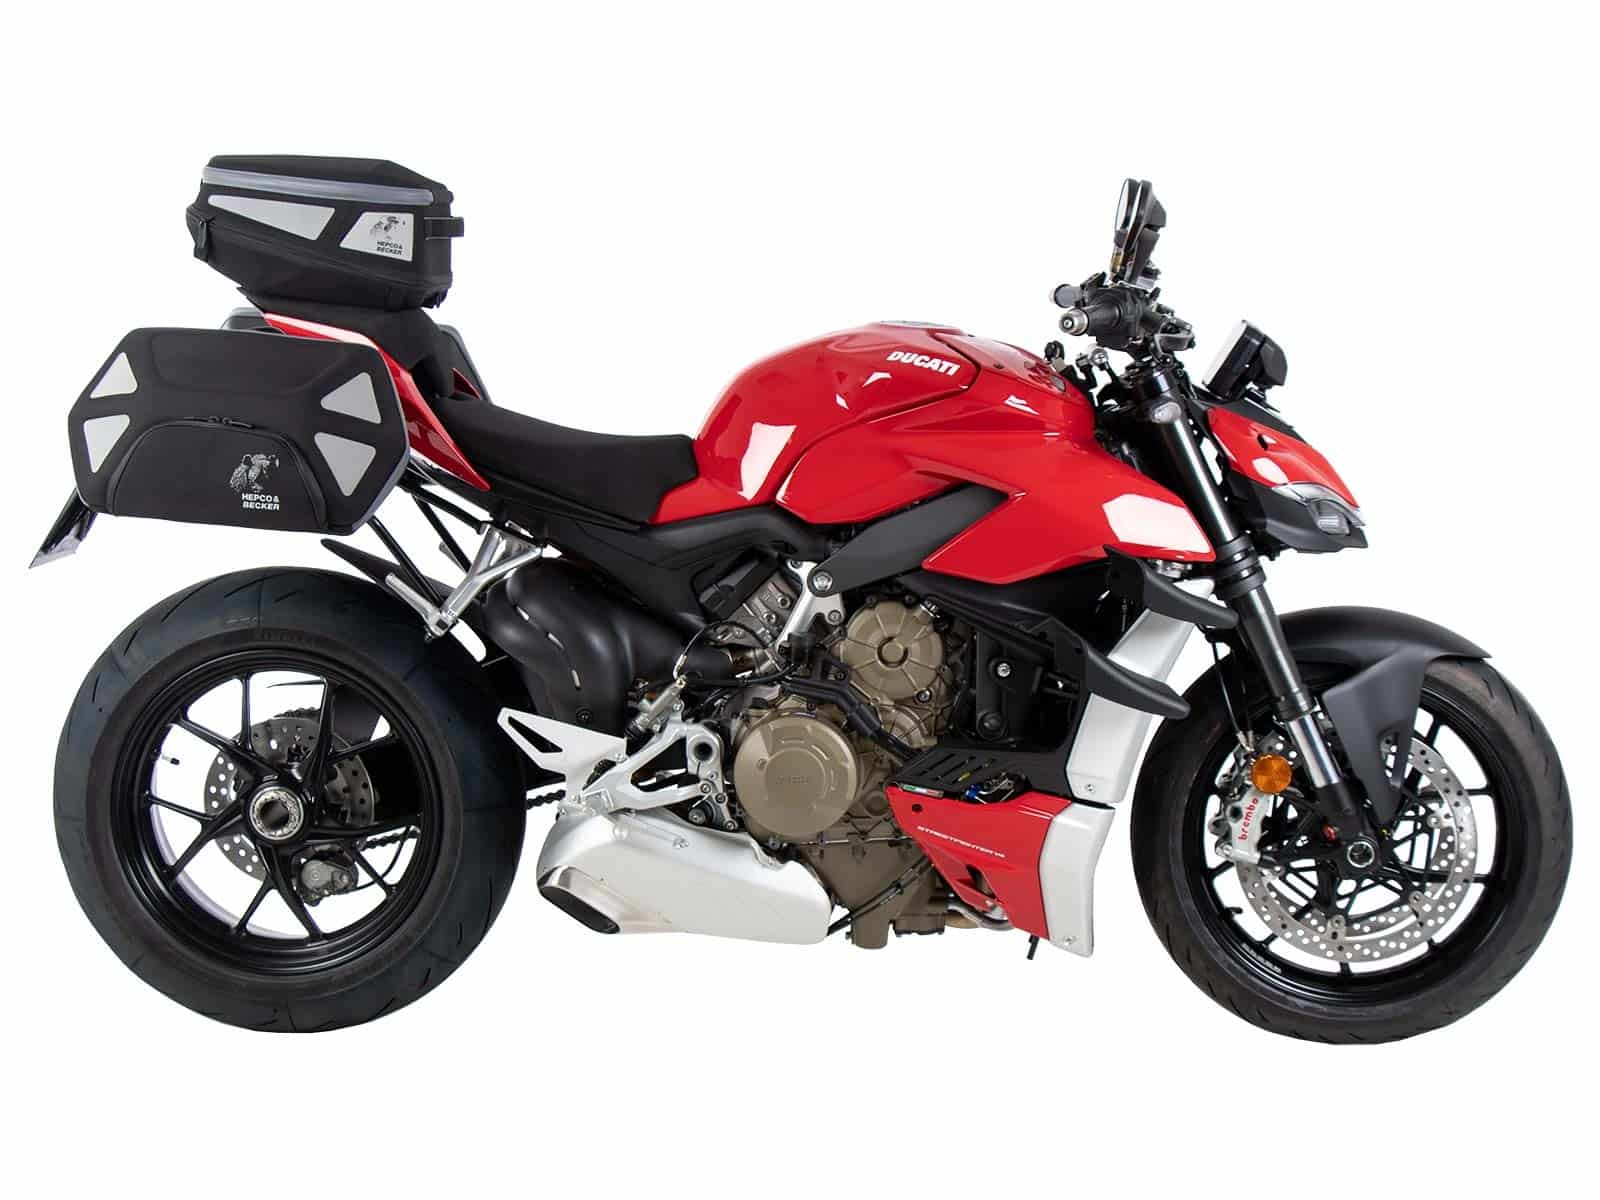 C-Bow sidecarrier for Ducati Panigale V4/S/R (2018-)